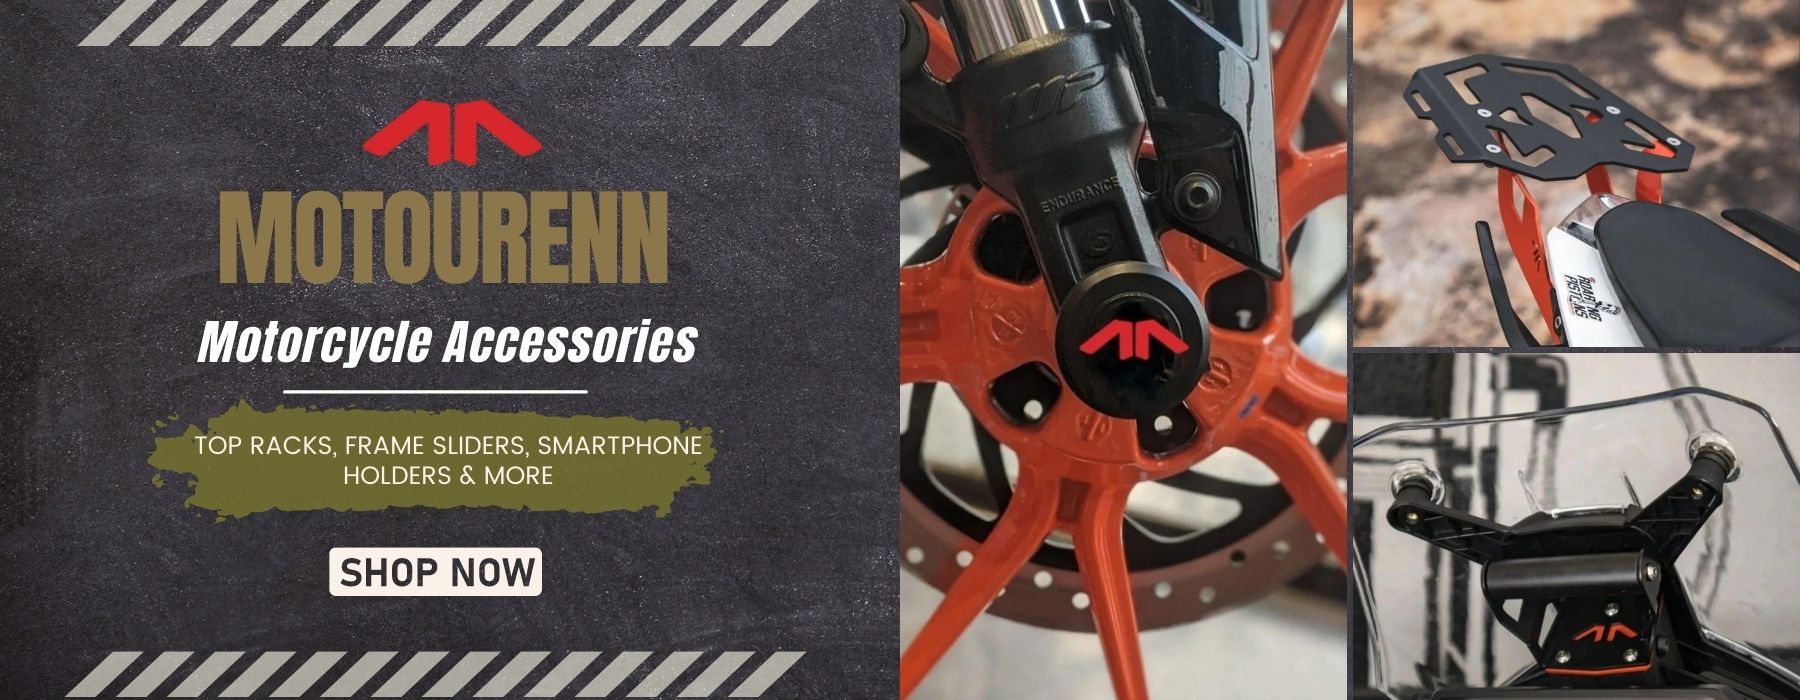 MOTOURENN Aftermarket Motorcycle Accessories - Proudly Made in India | OutdoorTravelGear.com